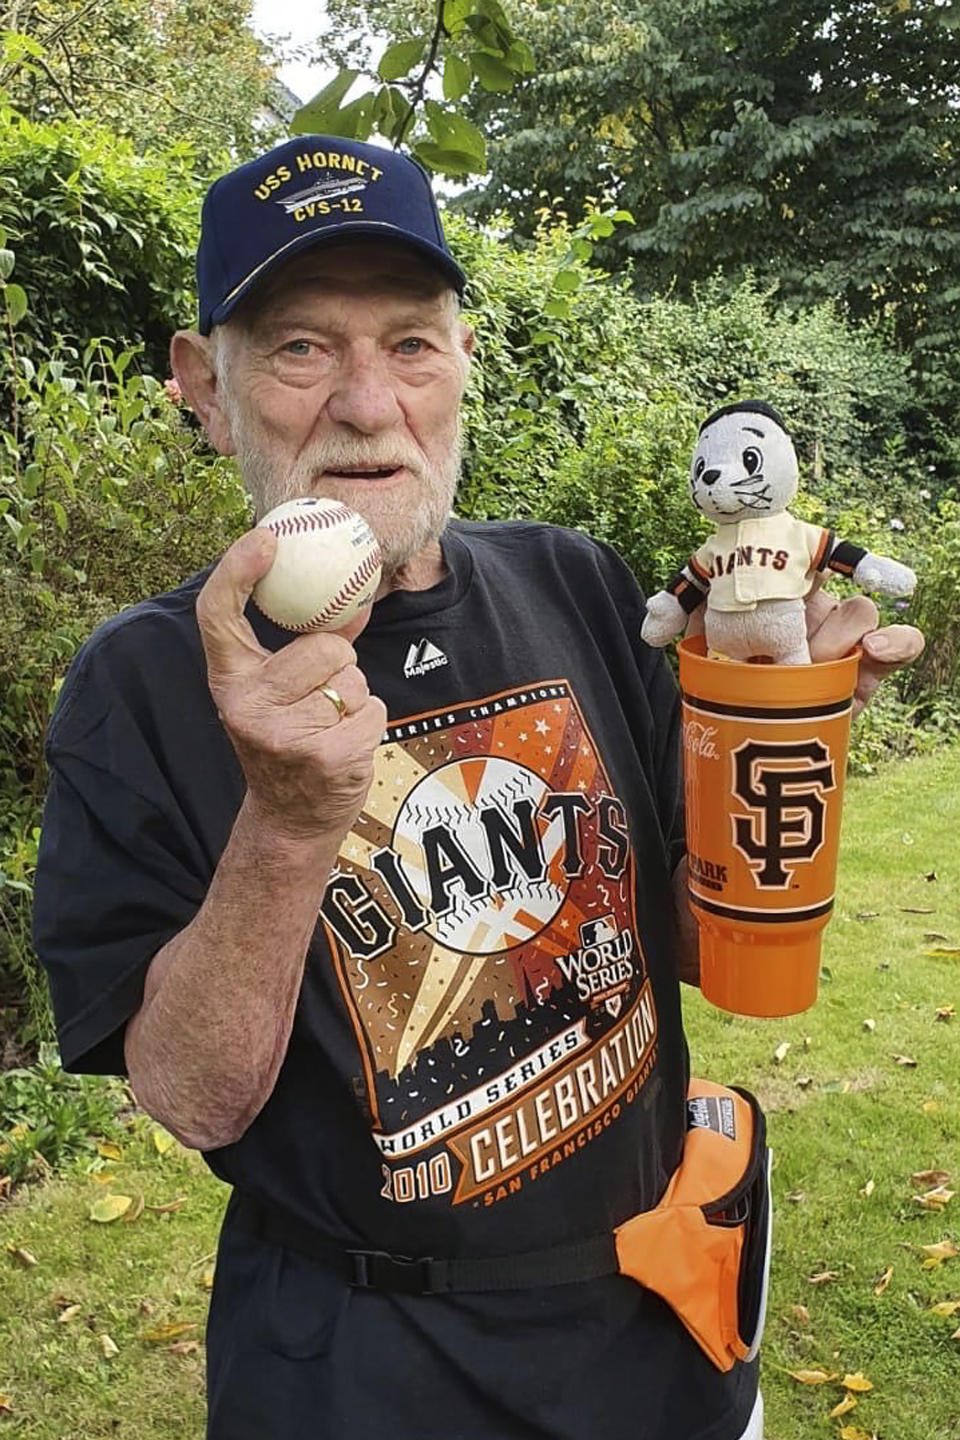 This Wednesday, Sept. 23, 2020, photo provided by Christiane Pohl-Rolfes shows her father, San Francisco Giants fan Manner Pohl, holding a baseball in Flensburg, Germany. (Christiane Pohl-Rolfes via AP)